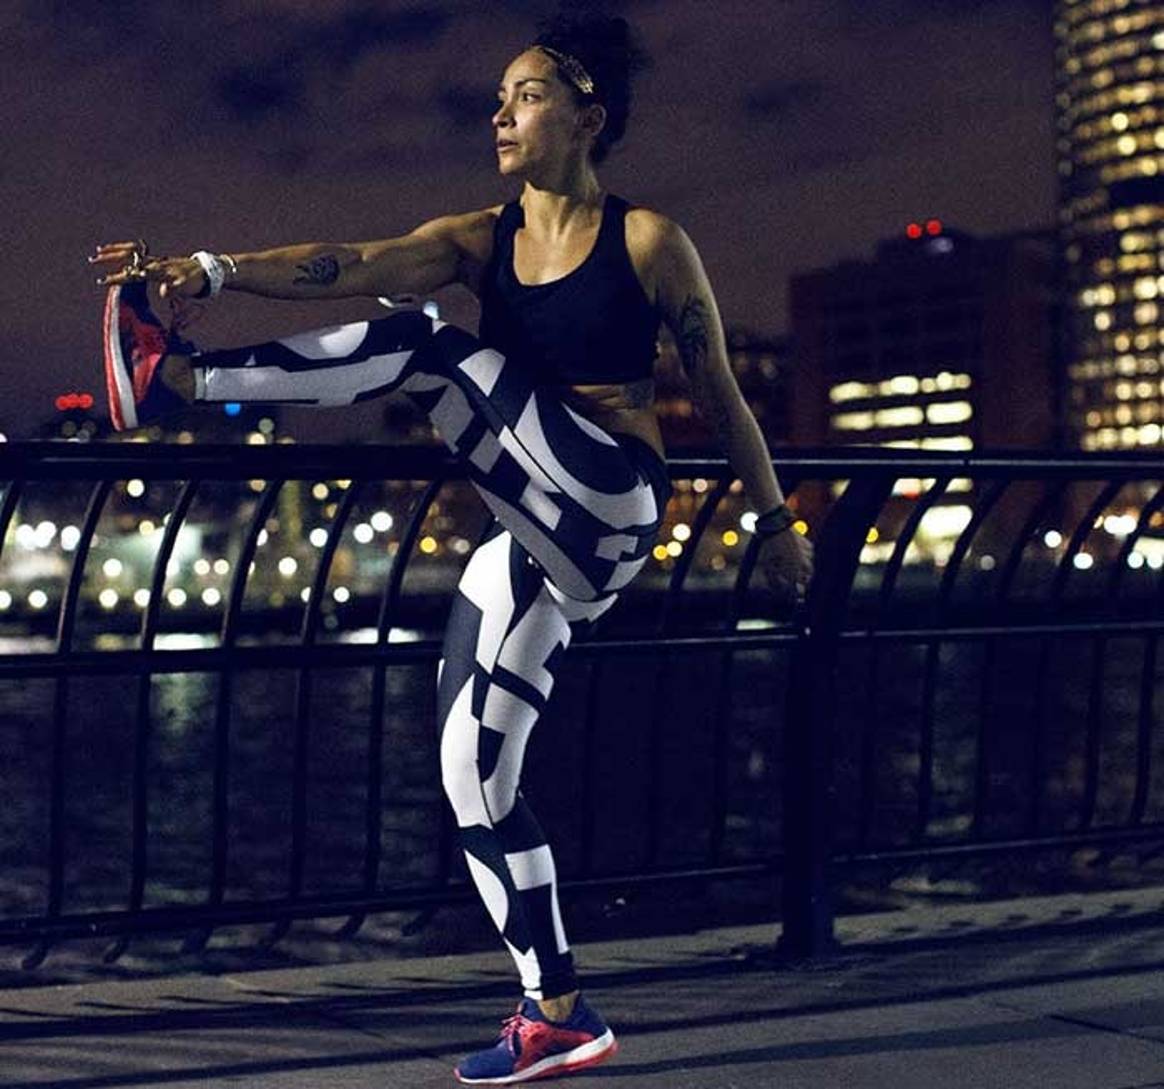 Over half of UK consumers purchased activewear in 2015